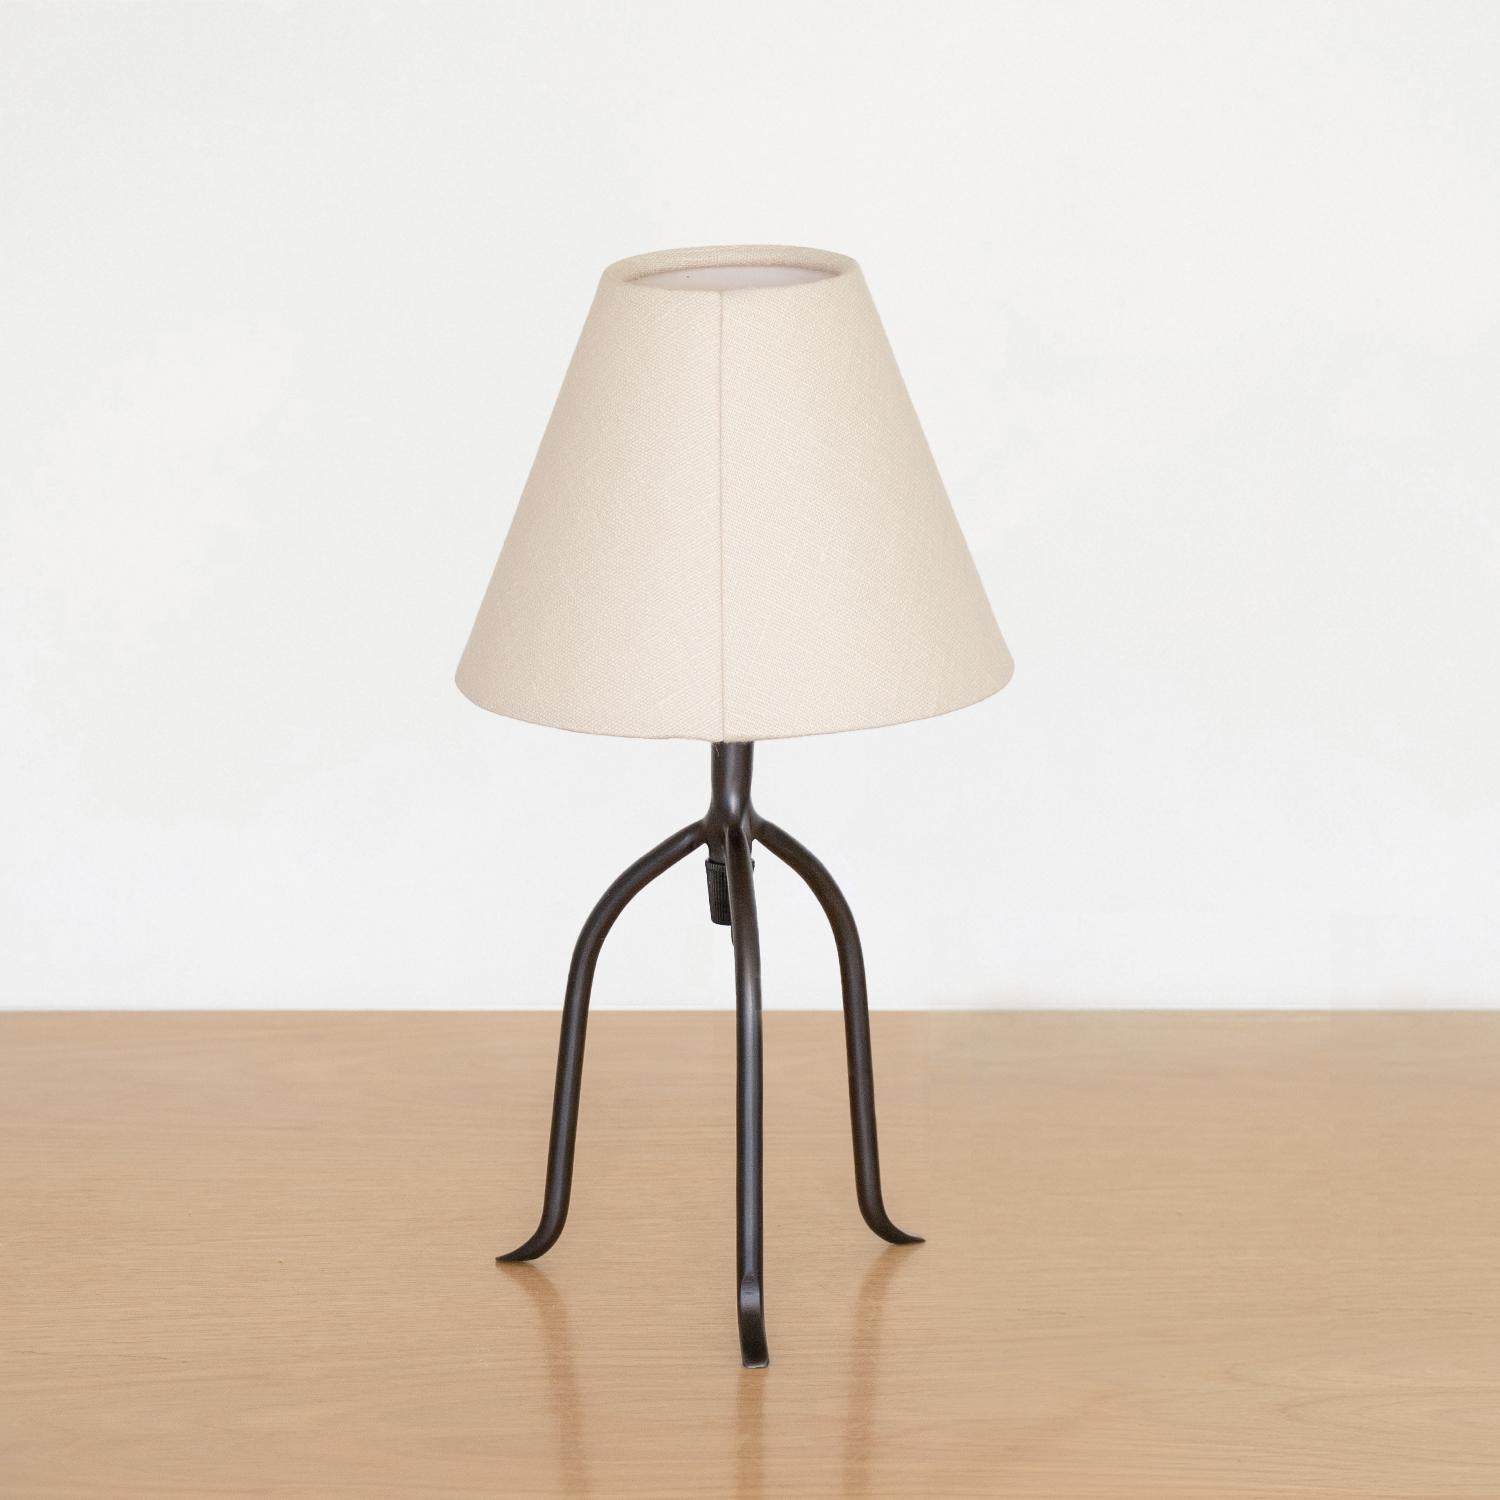 Petite iron tripod lamp with slender legs and tapered feet. New wiring and new oyster linen shade. Multiple available, sold individually. Takes one E12 base bulb, up to 25 W or higher using LED.